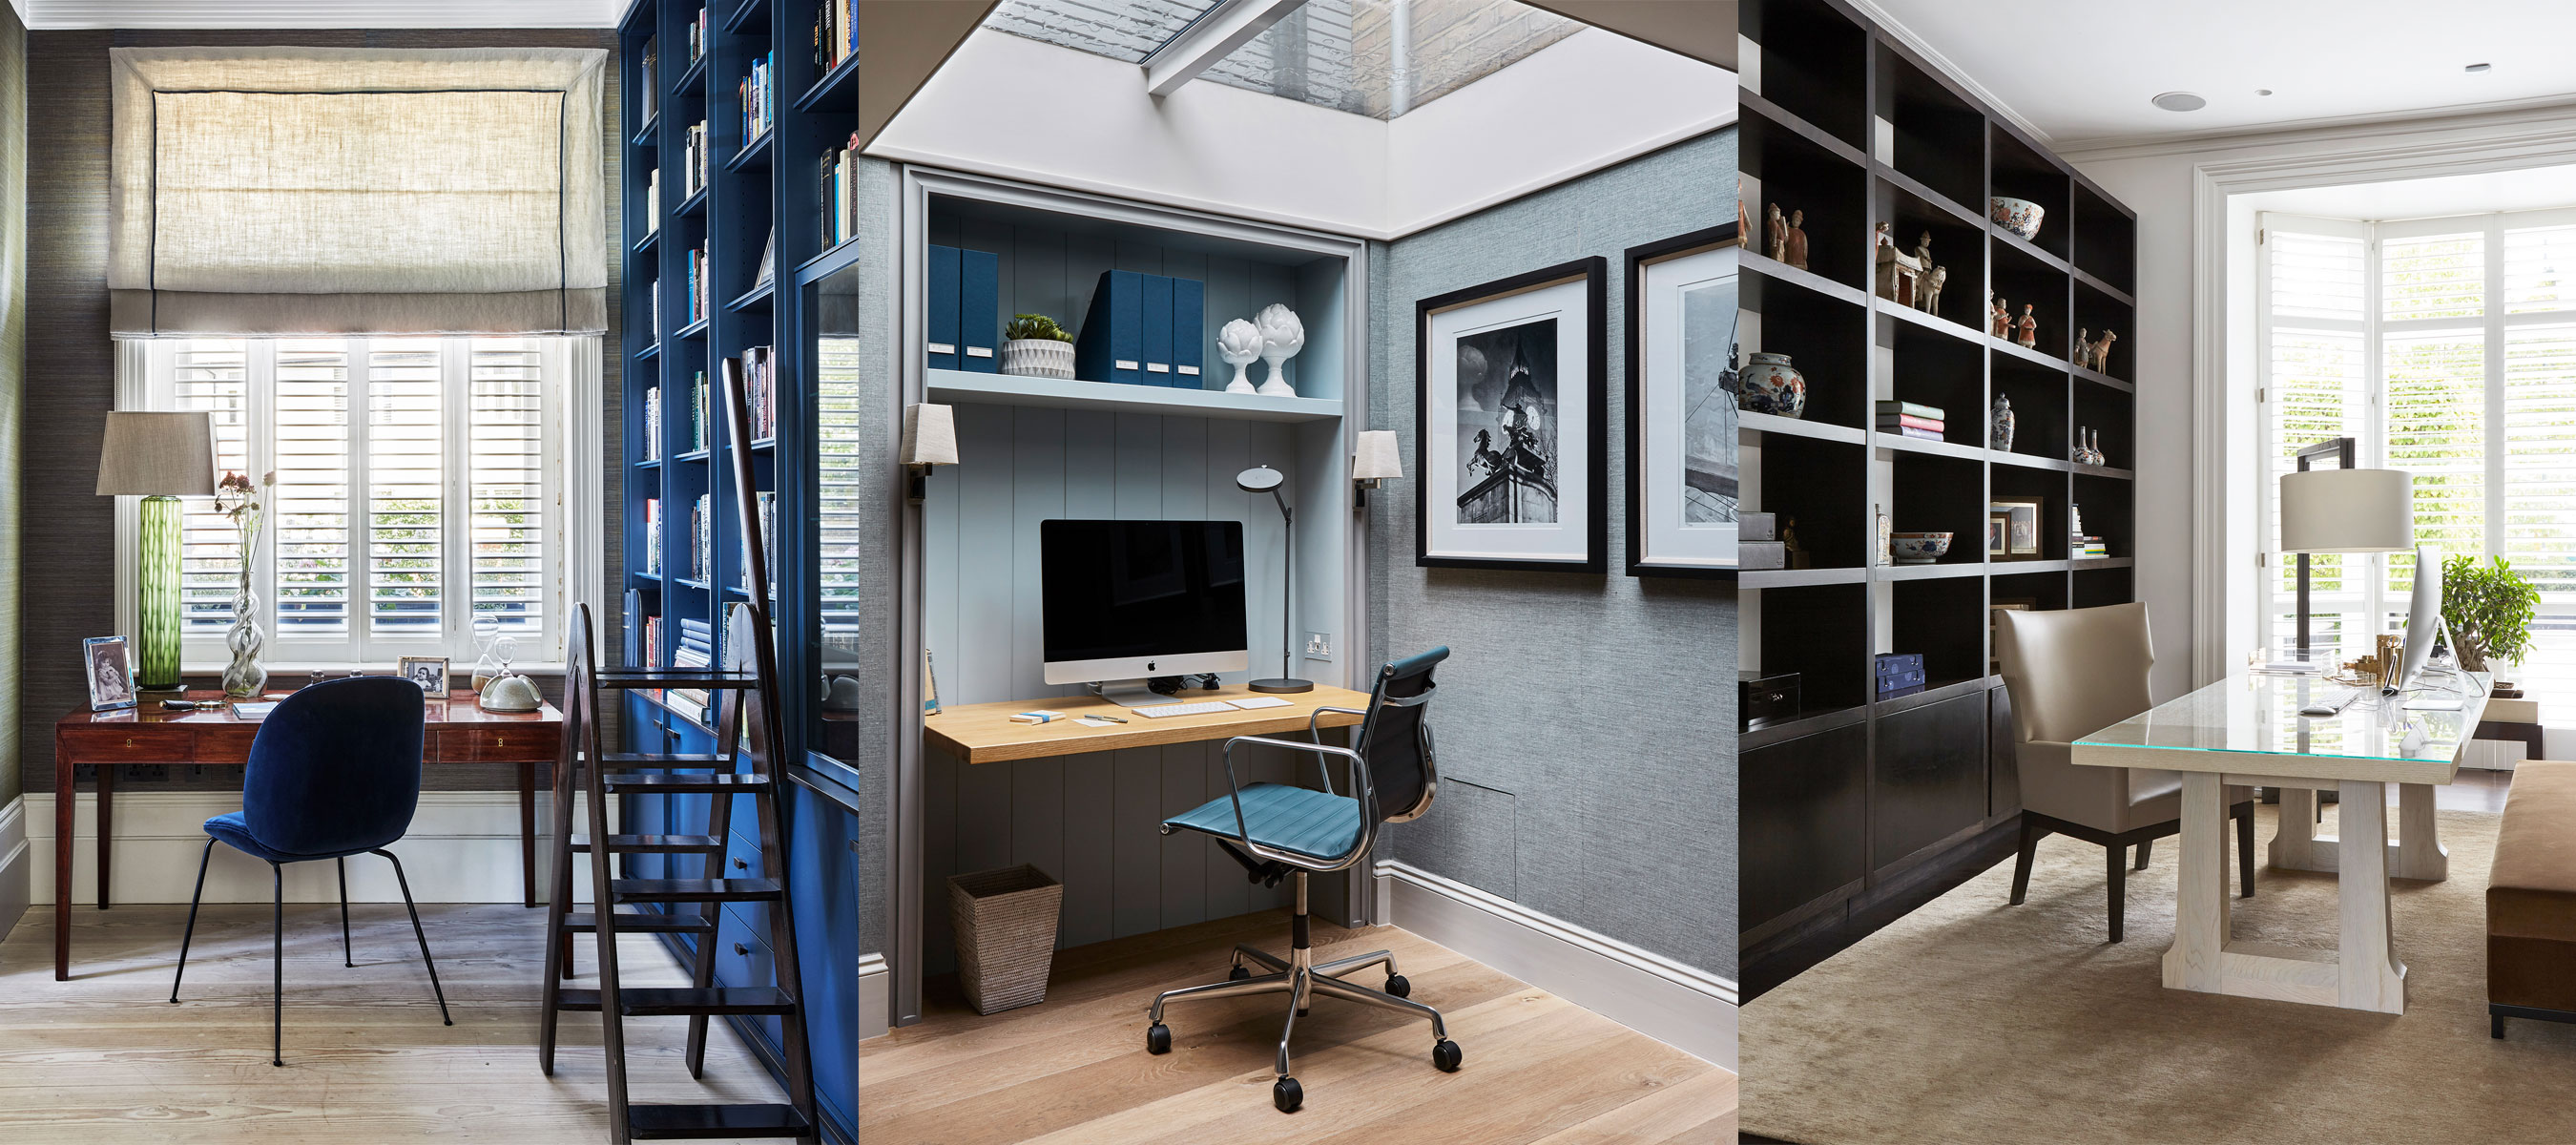 Tips for setting up a home office from a professional organizer